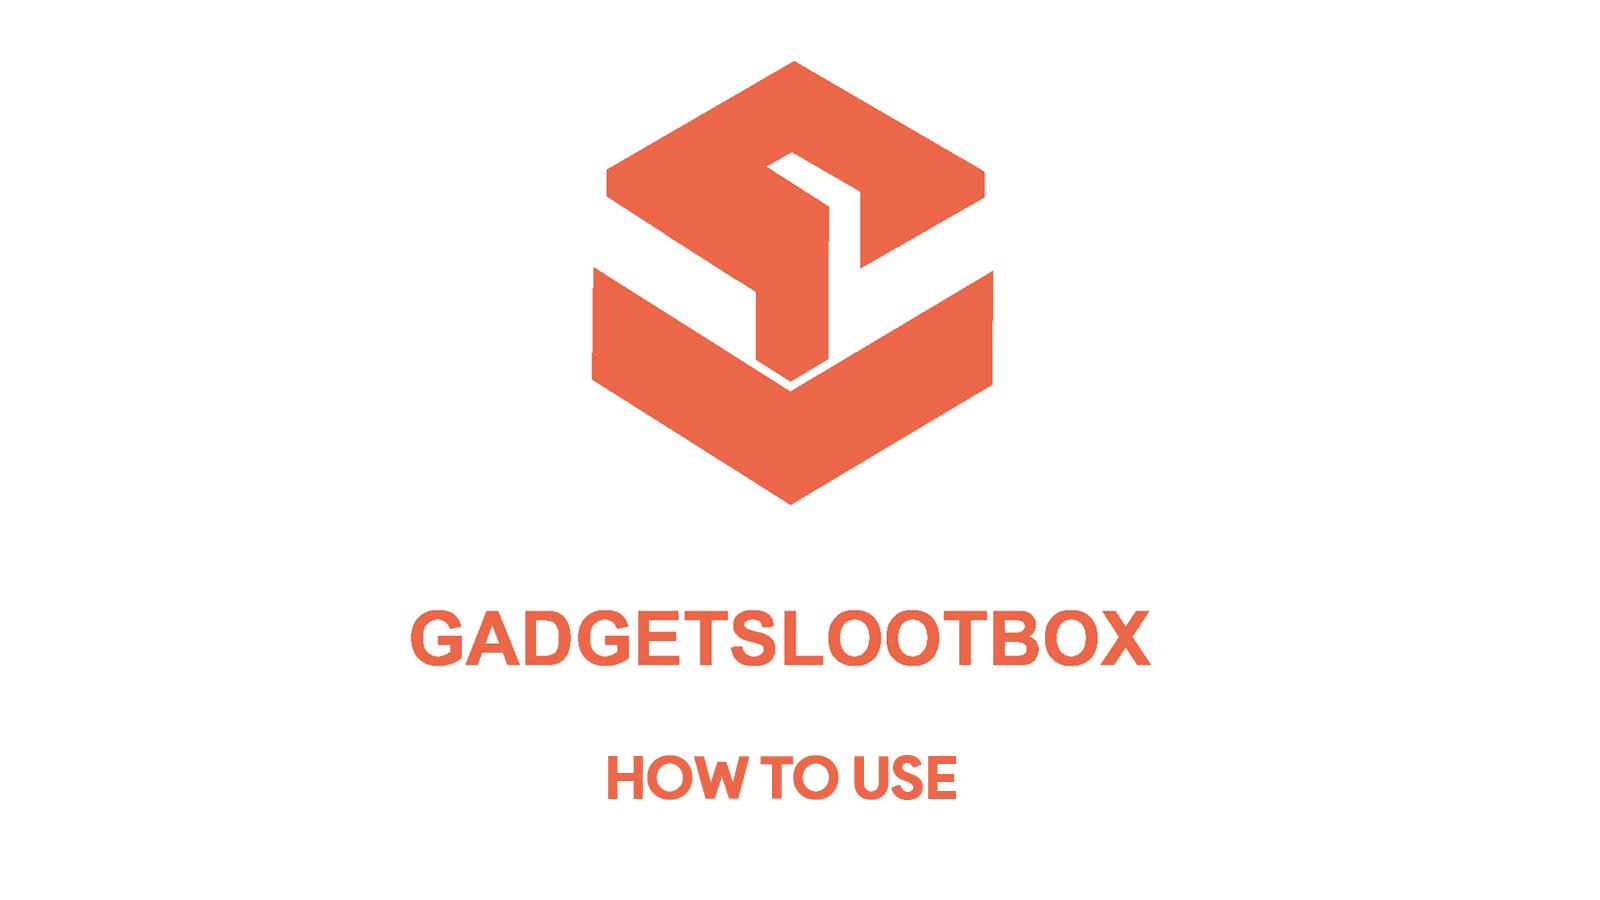 How to use Gadgetlootbox for grabbing exciting deals on electronic gadgets